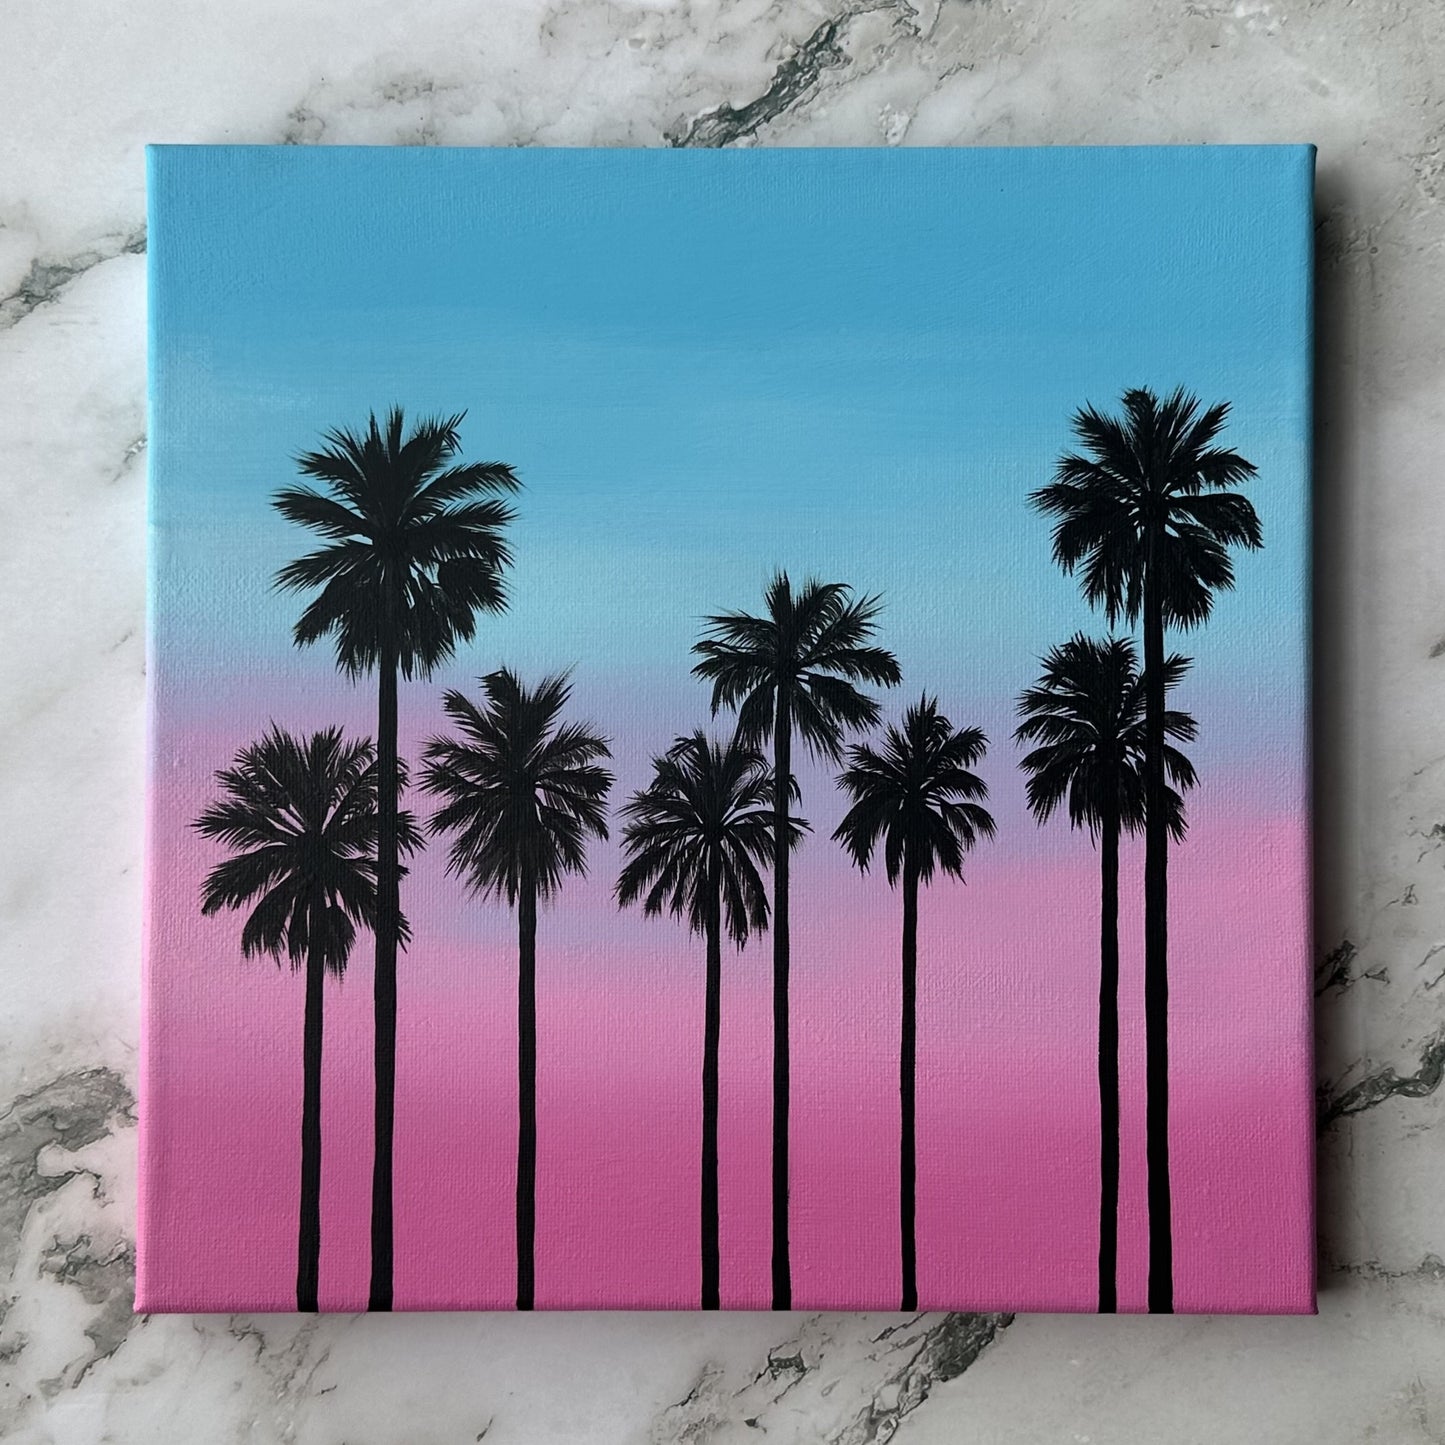 palms and a cotton candy sunset